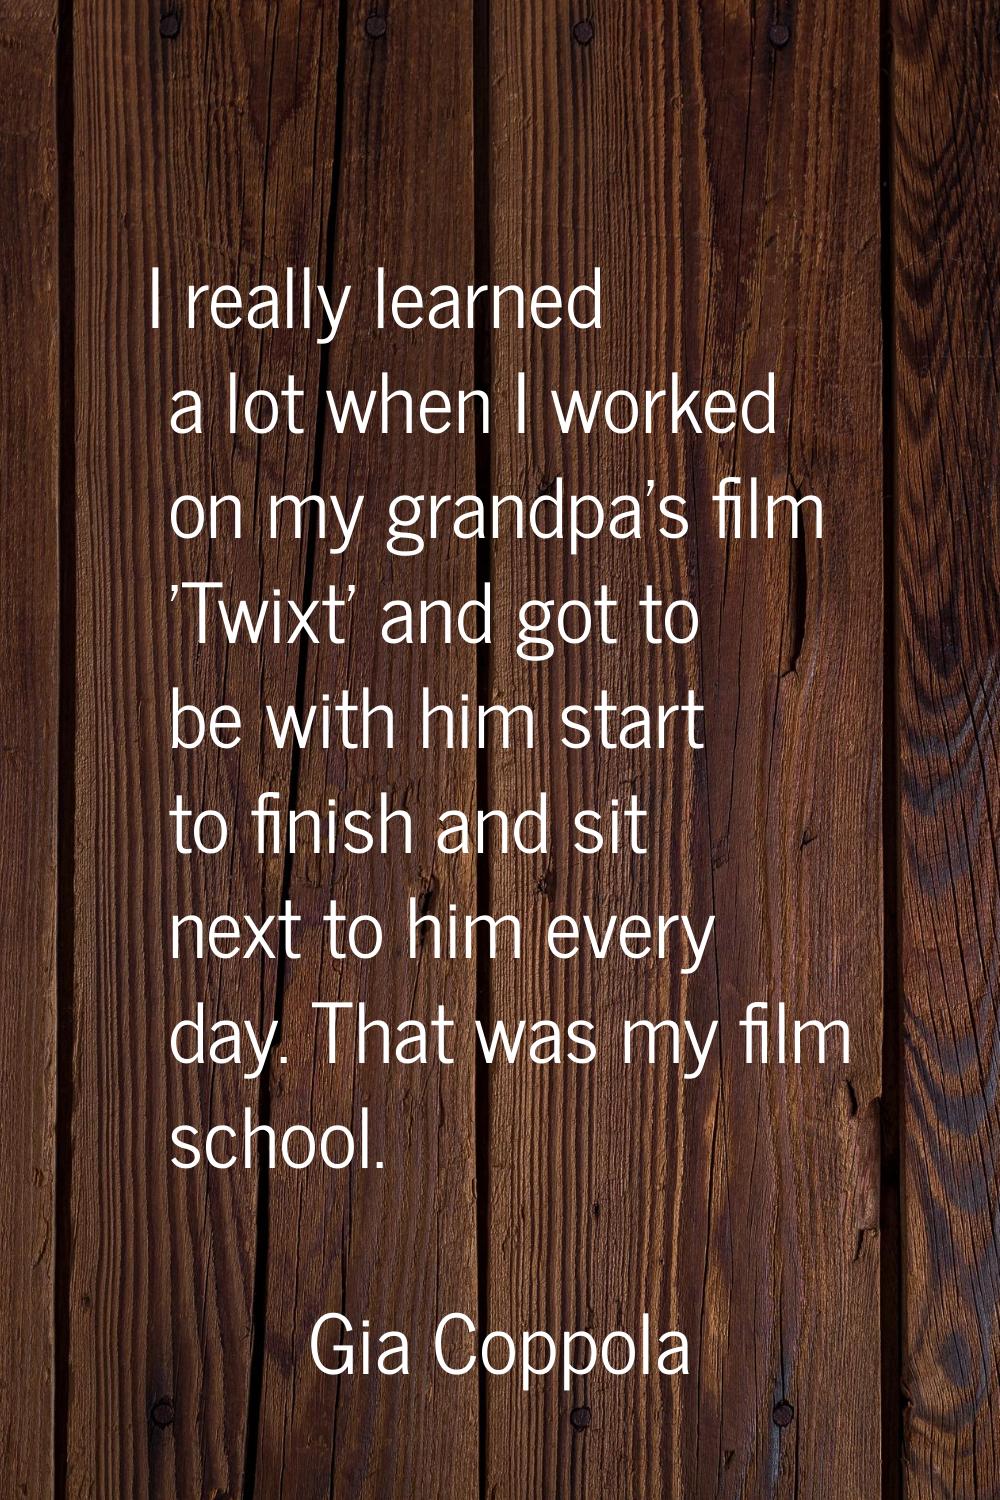 I really learned a lot when I worked on my grandpa's film 'Twixt' and got to be with him start to f